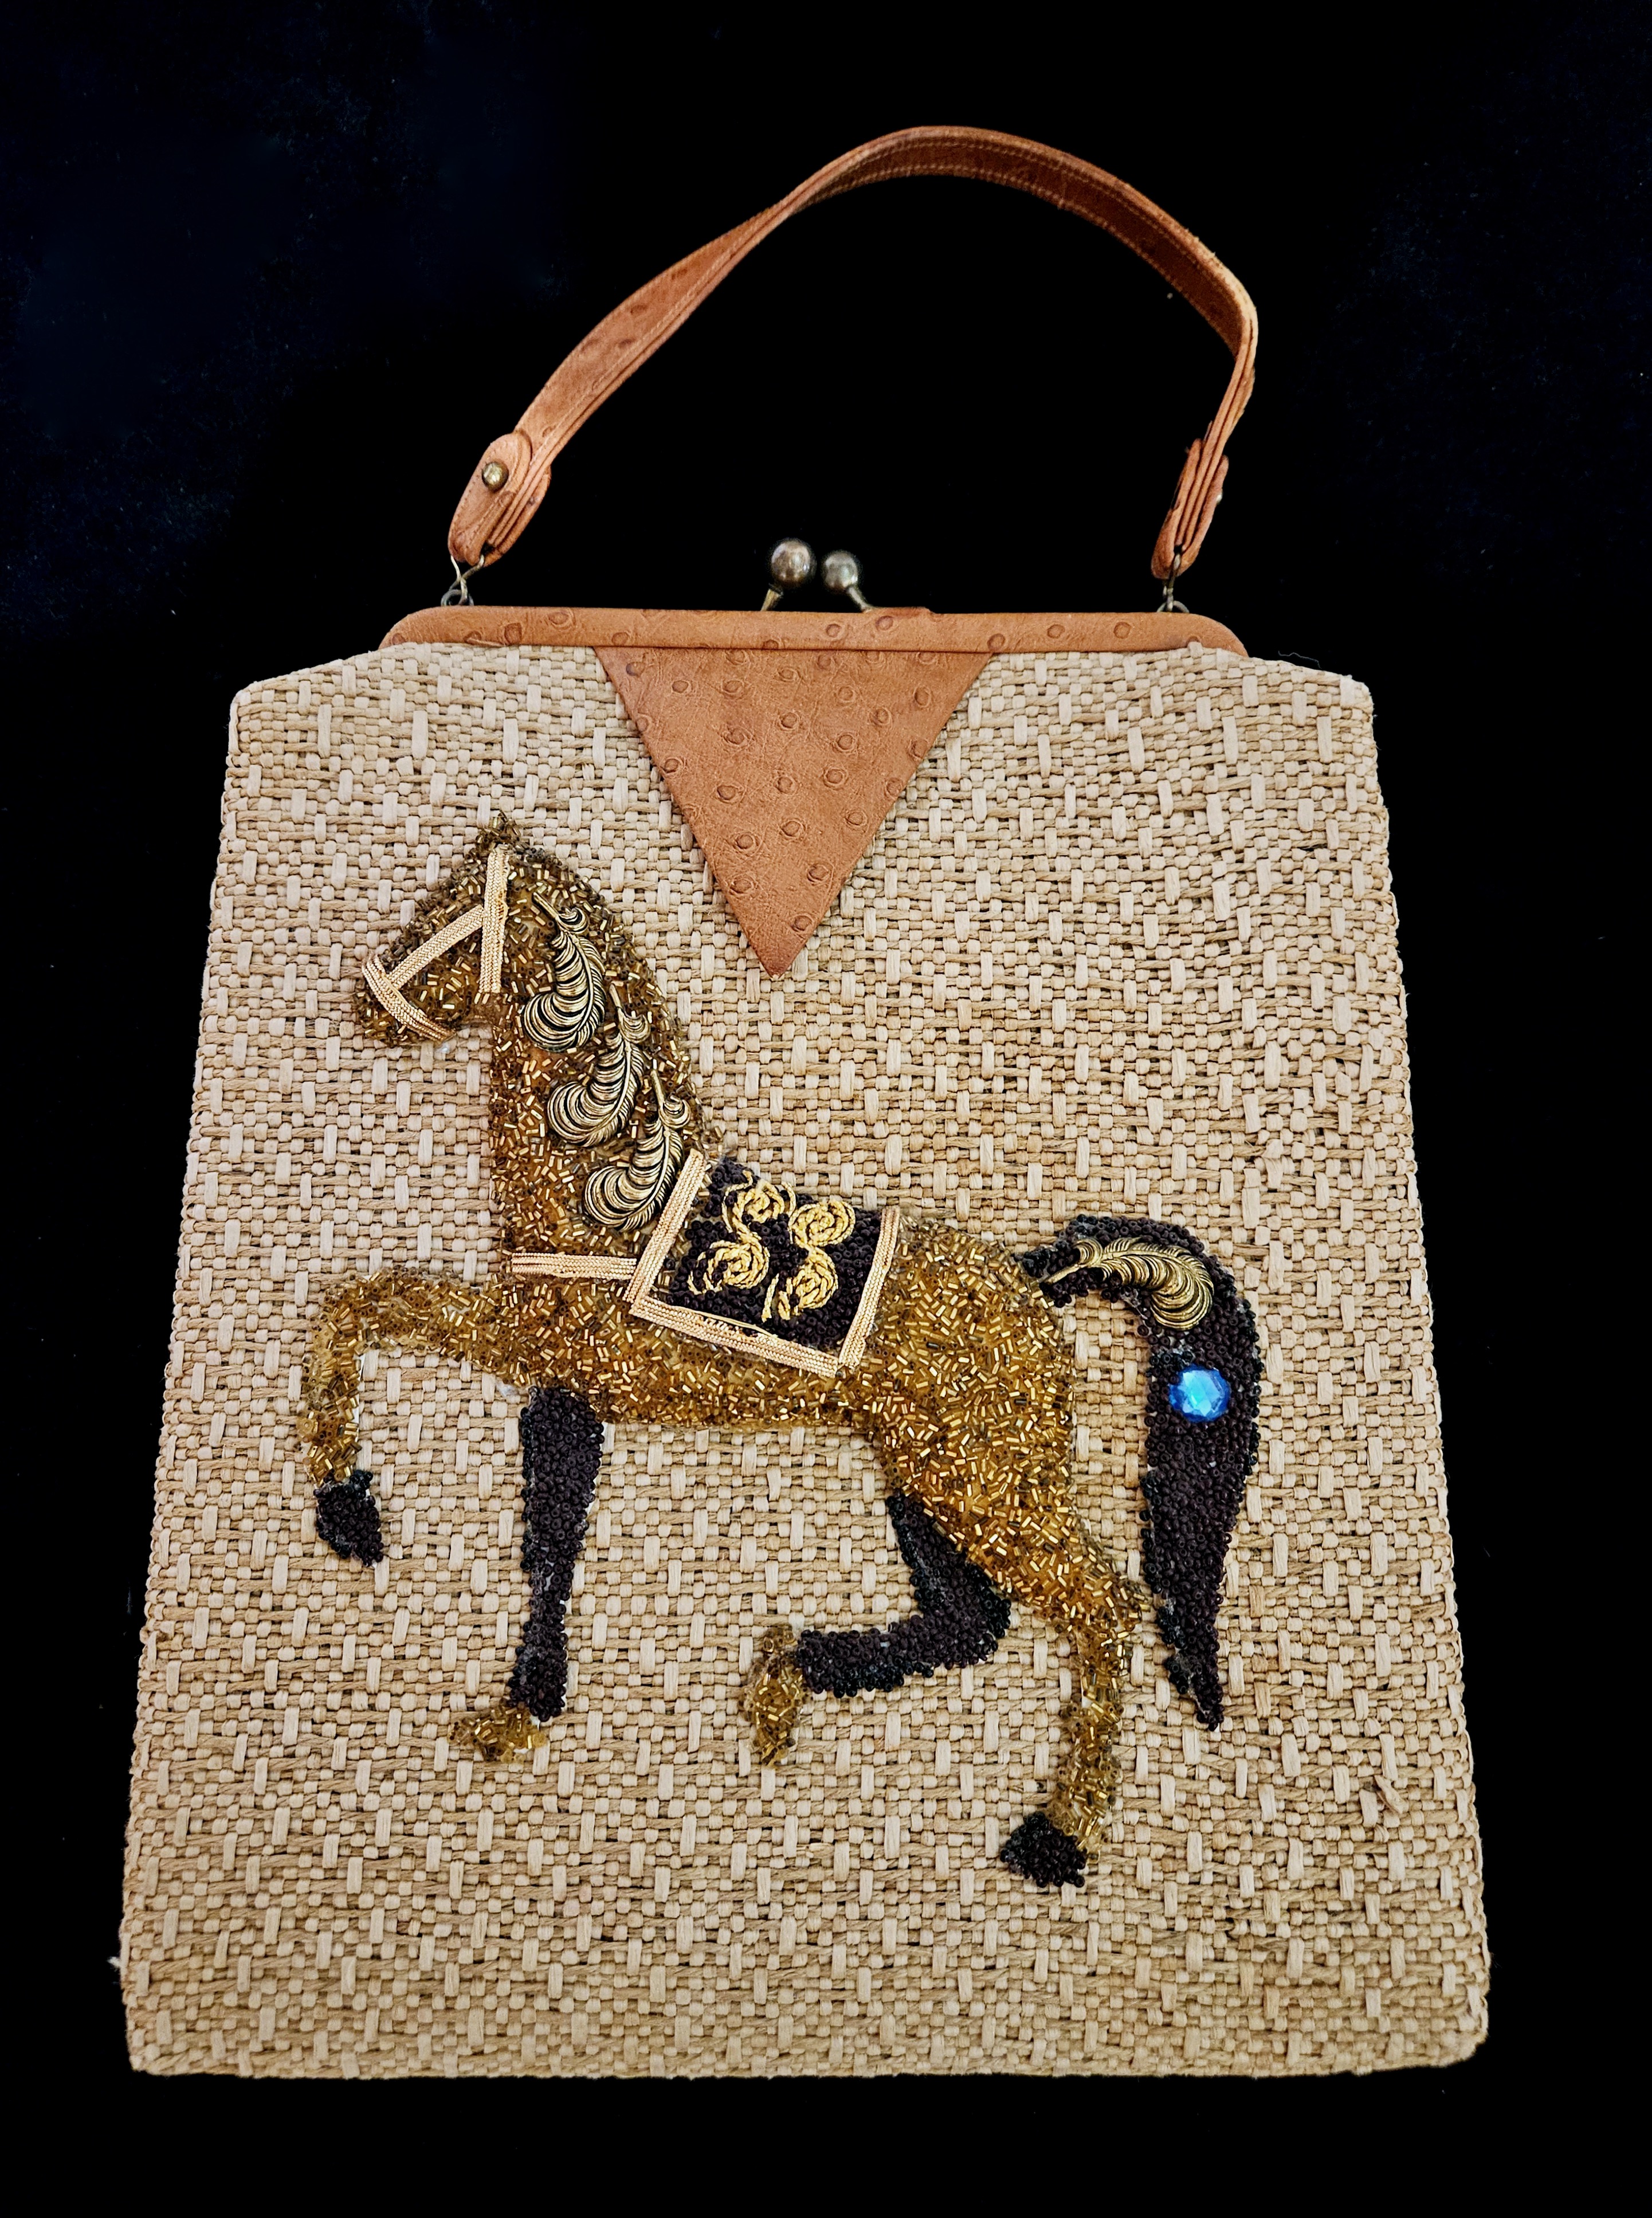 Collection from Tassenmuseum, The Museum of Bags and Purse… | Flickr